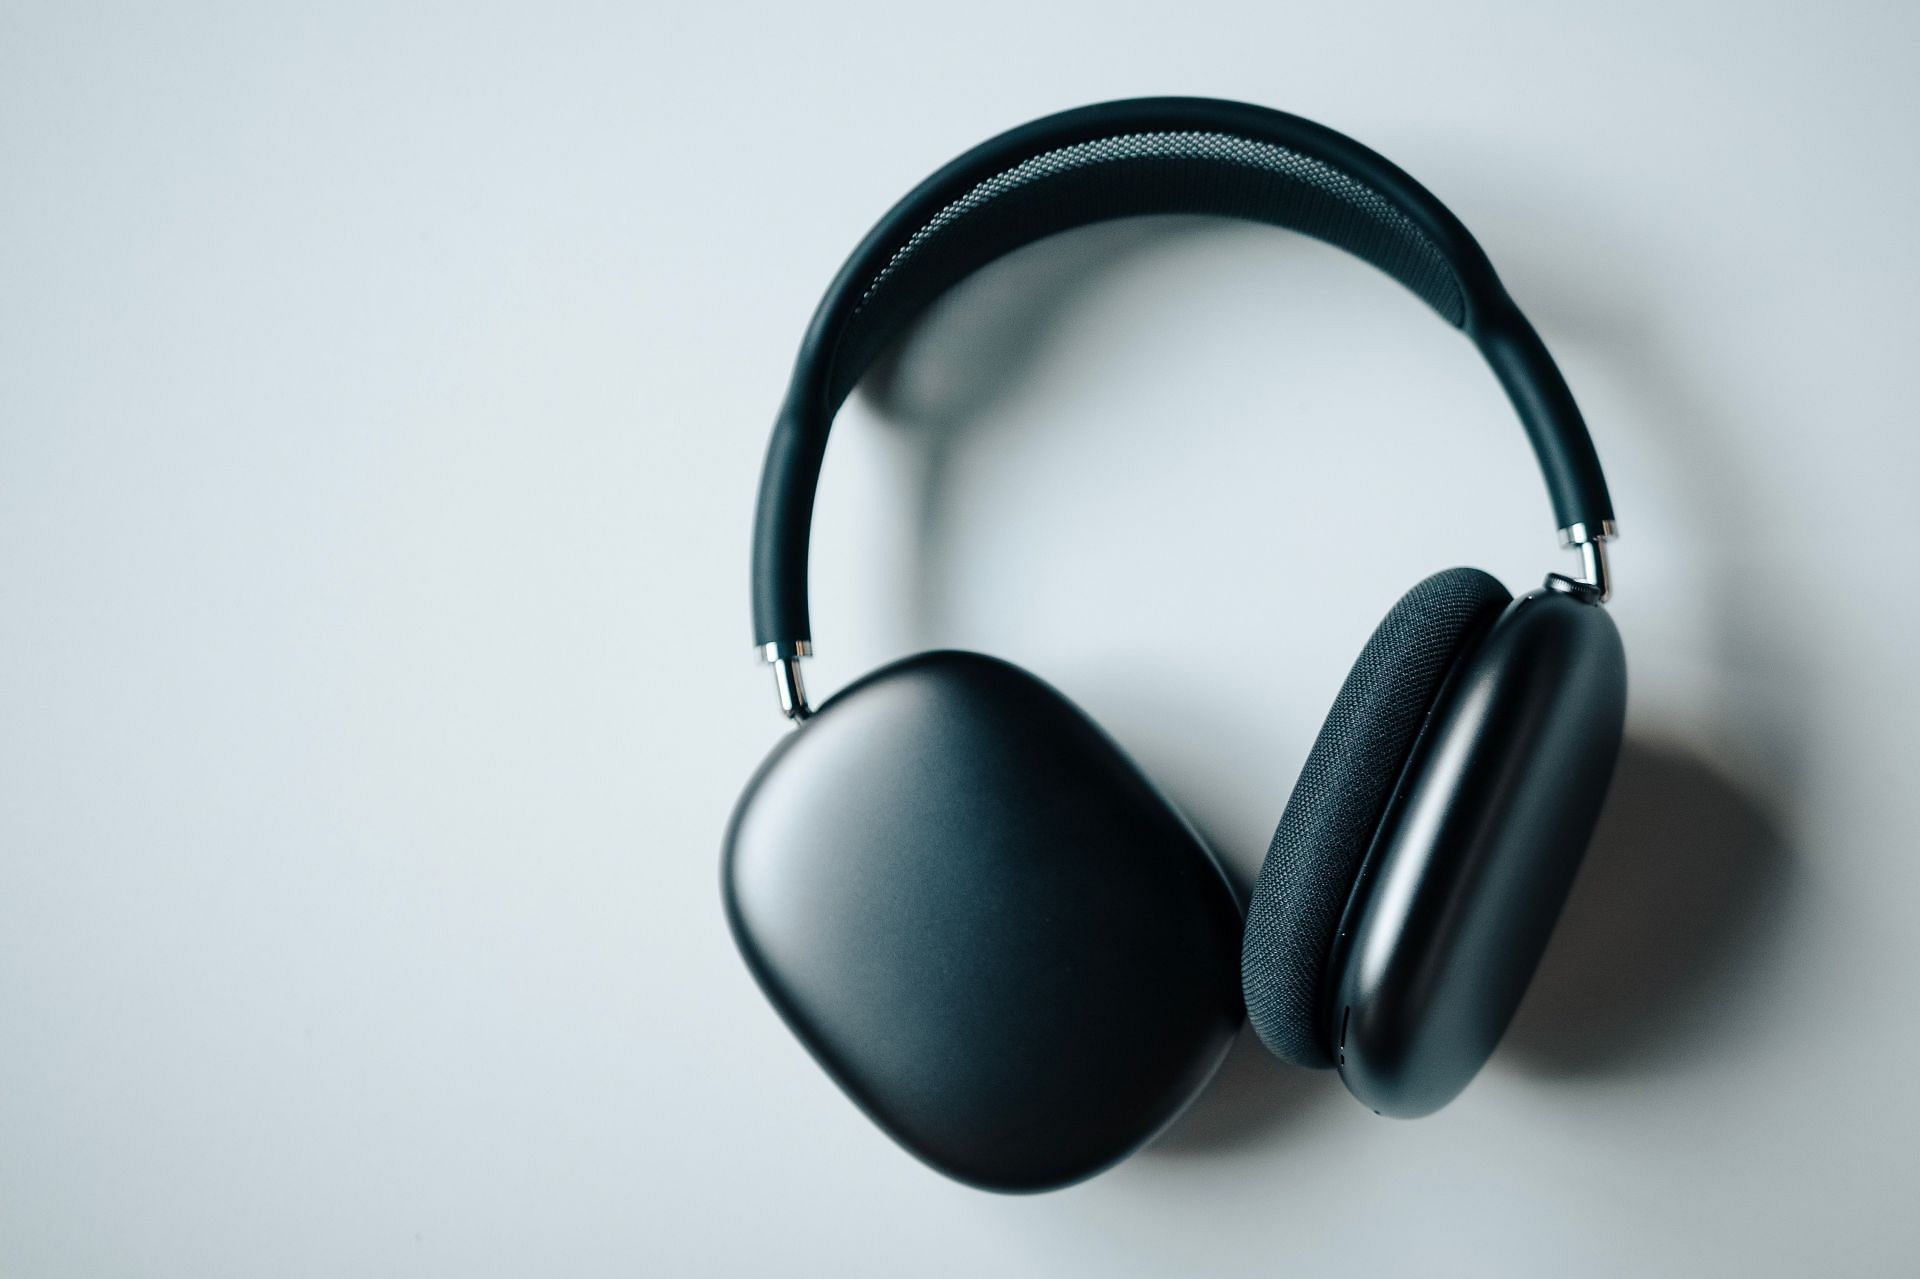 Can listen to other water sounds (Image via Unsplash/Simon Hrozian)